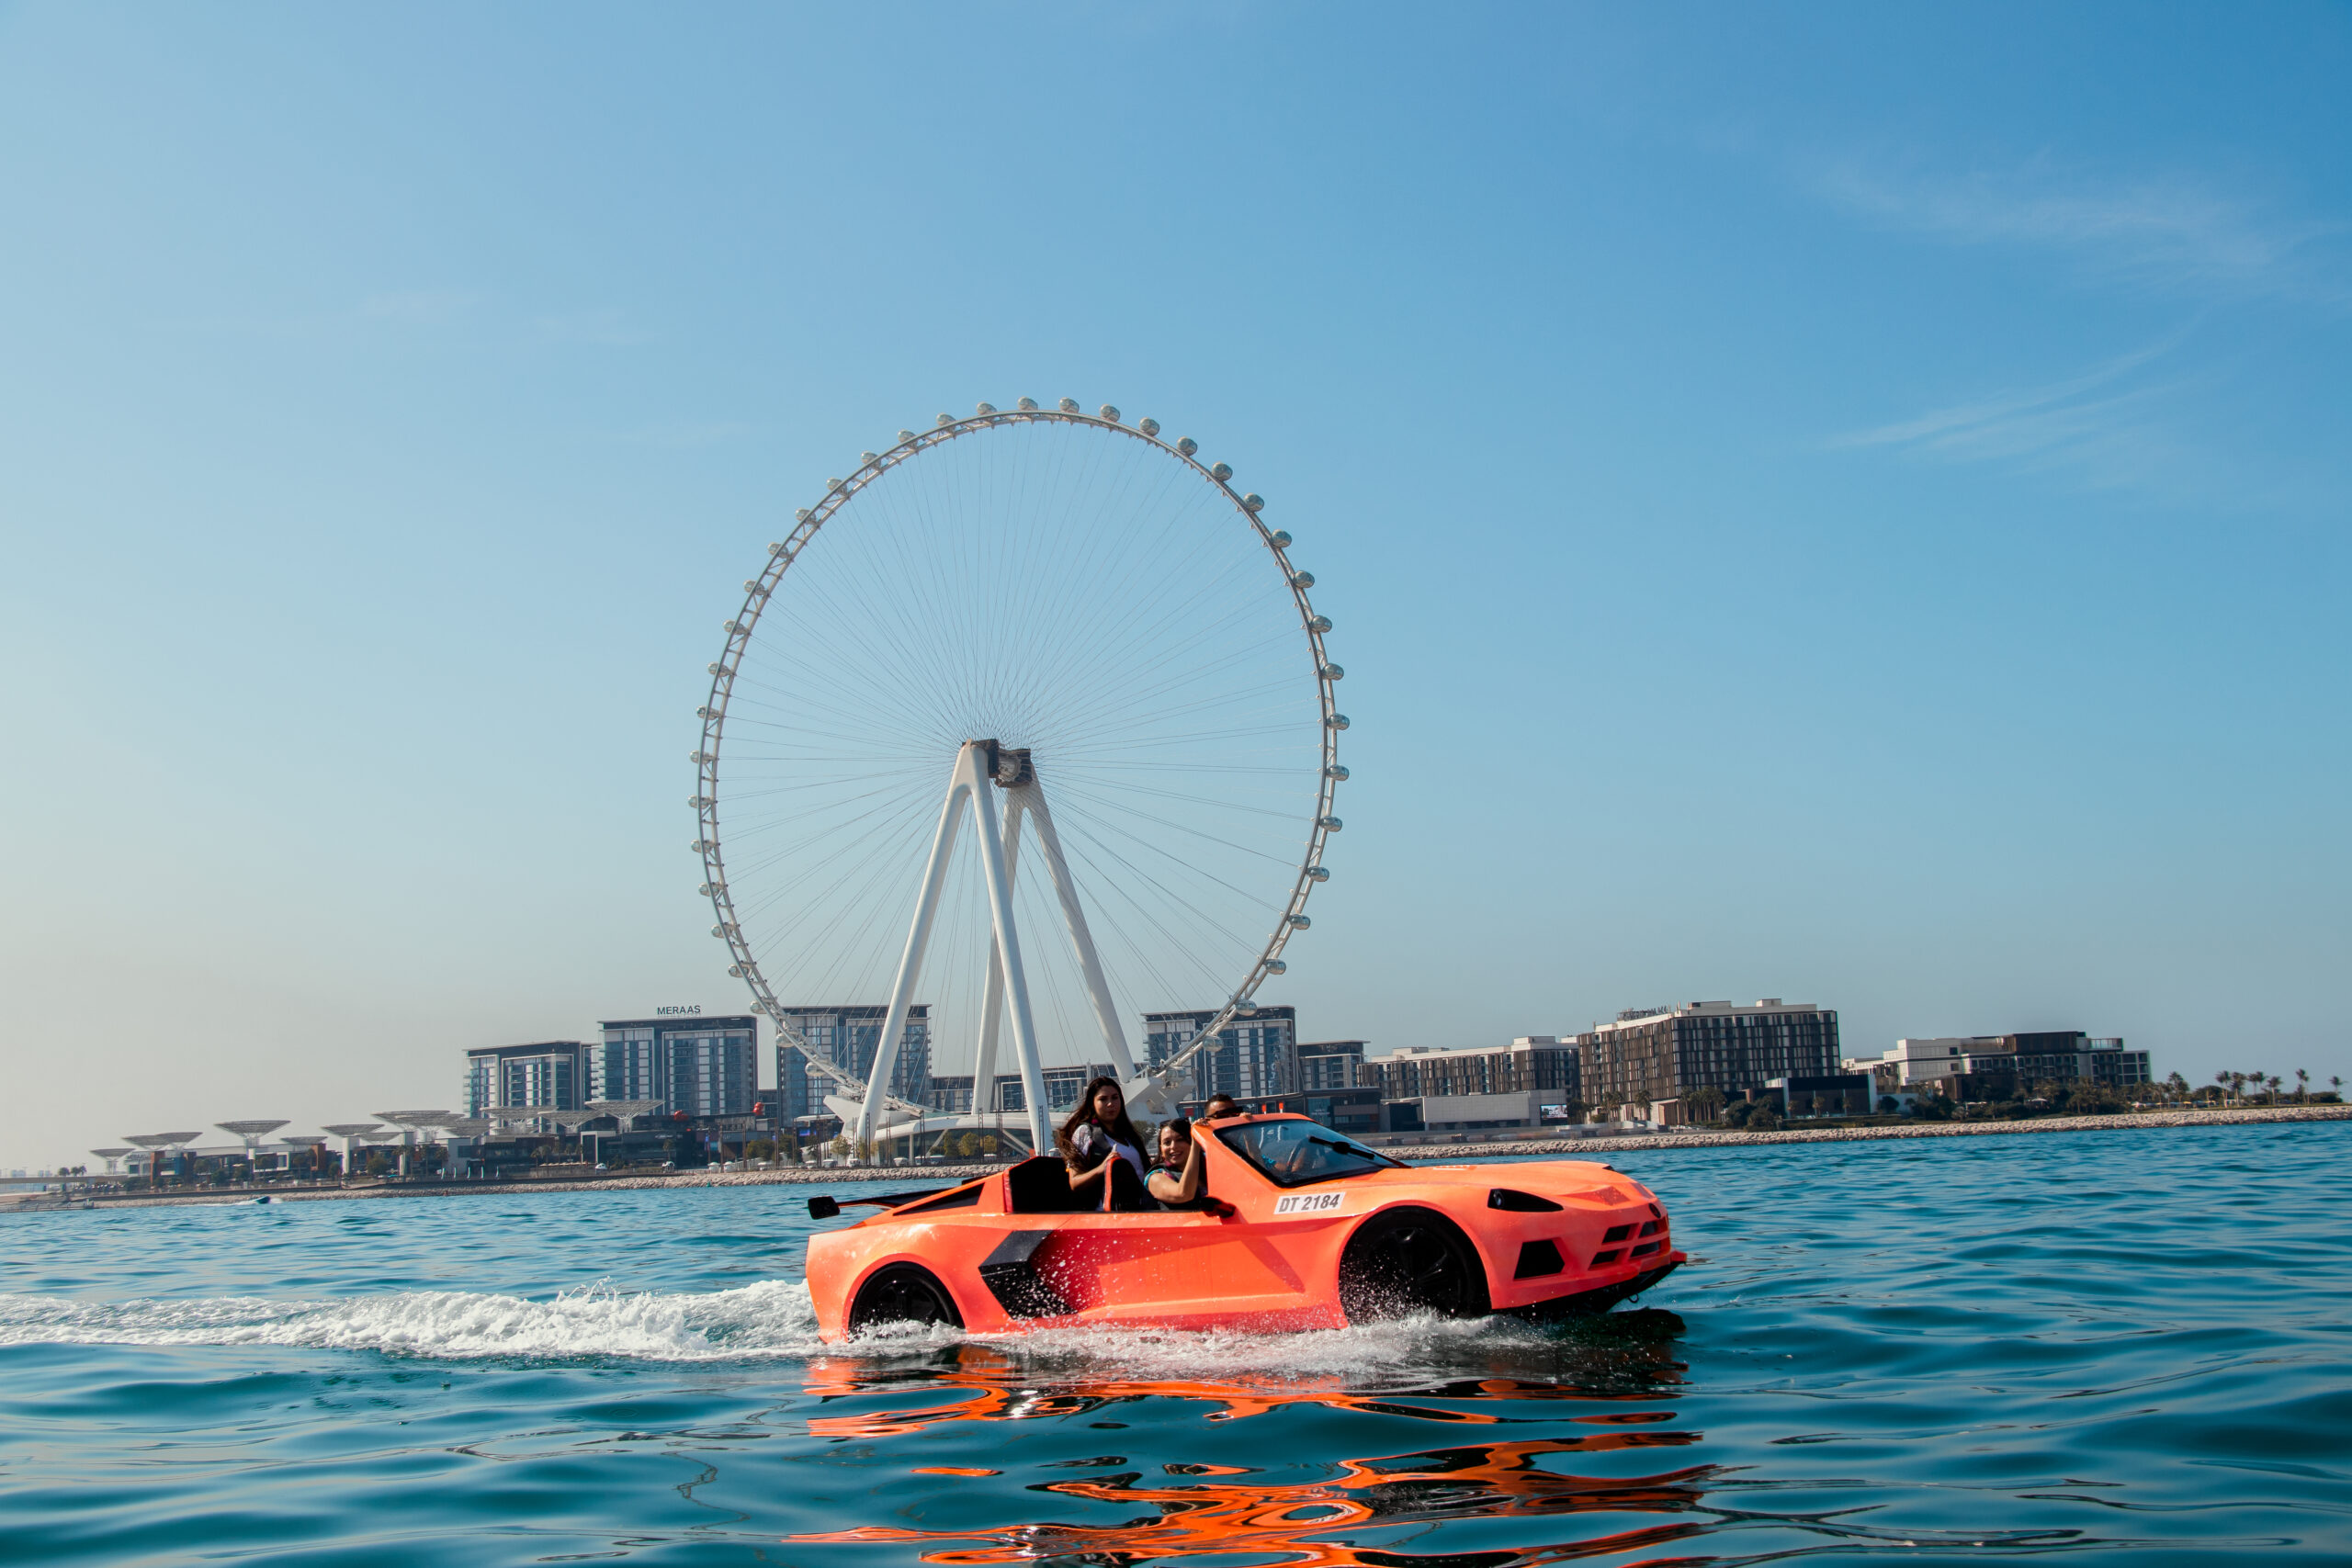 Two people in an orange amphibious jet car on the water with a giant observation wheel in the background.